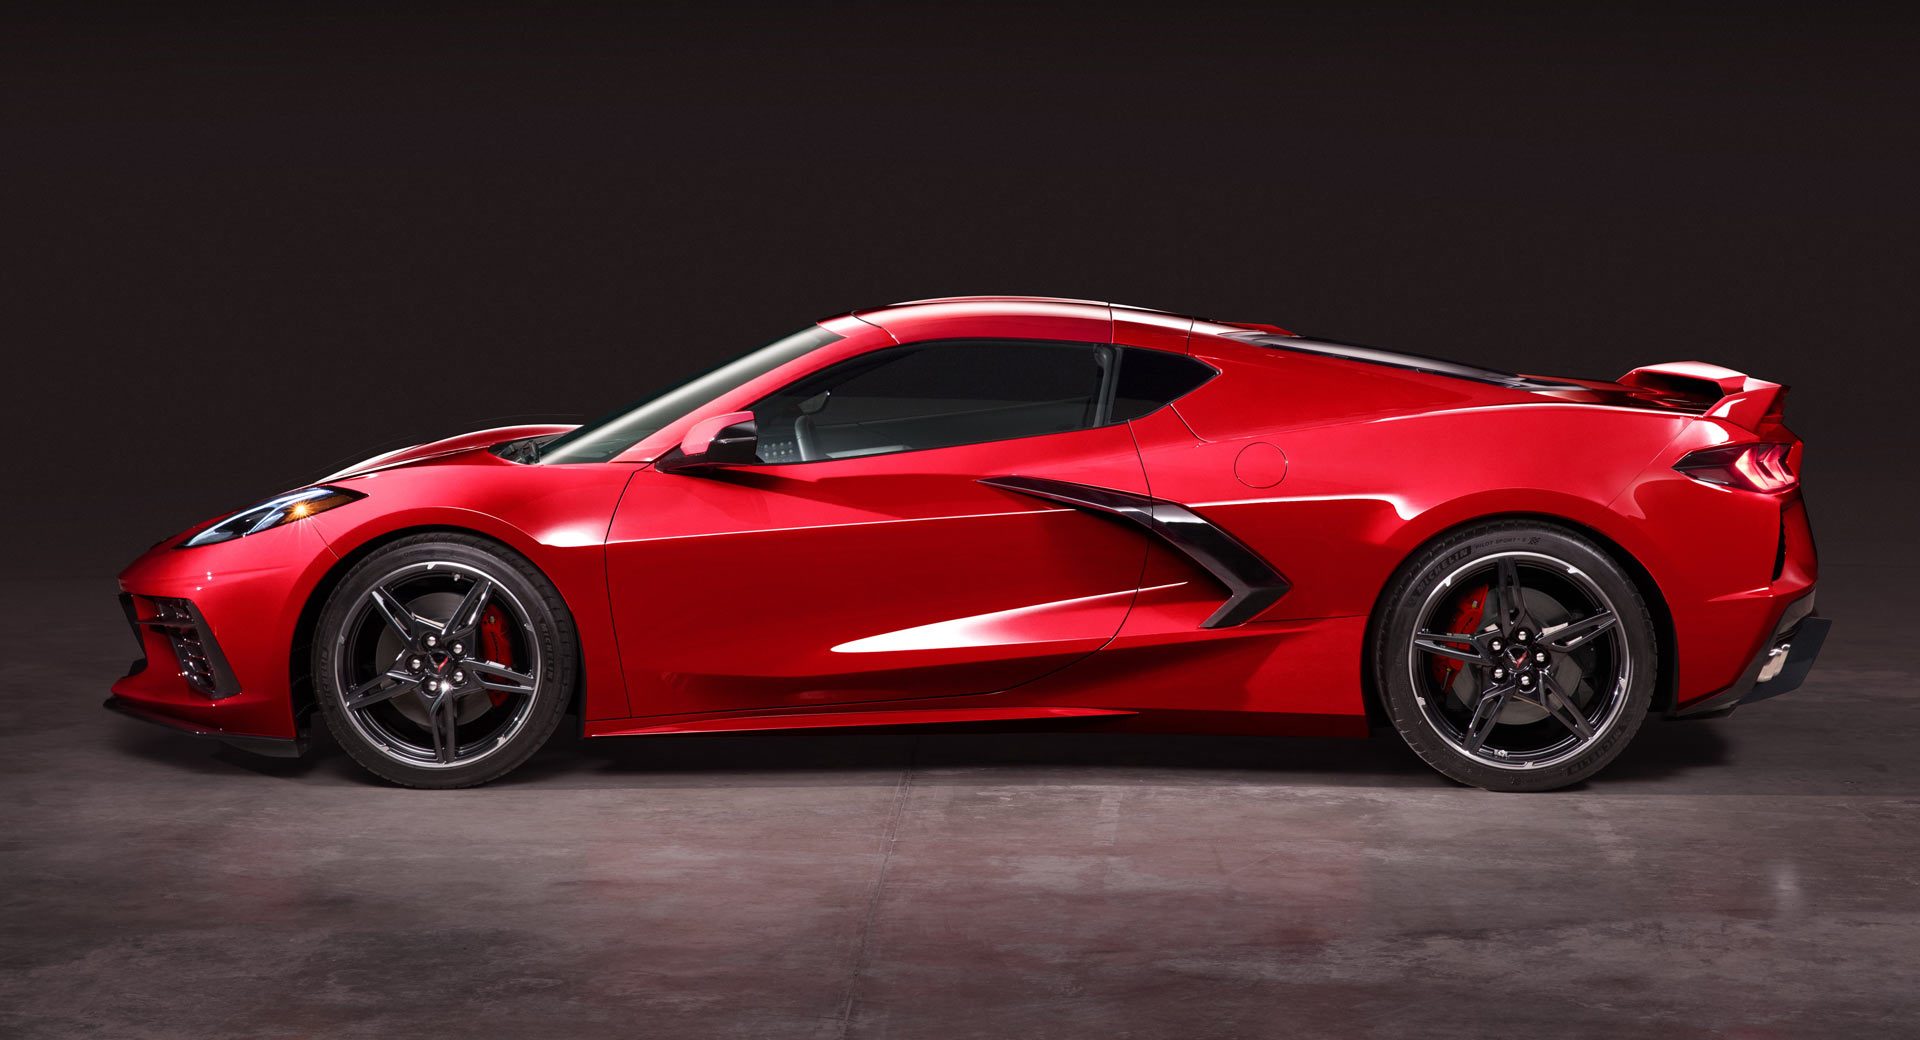 Top 5 Upcoming Cars in 2021 and When They Will Come Out